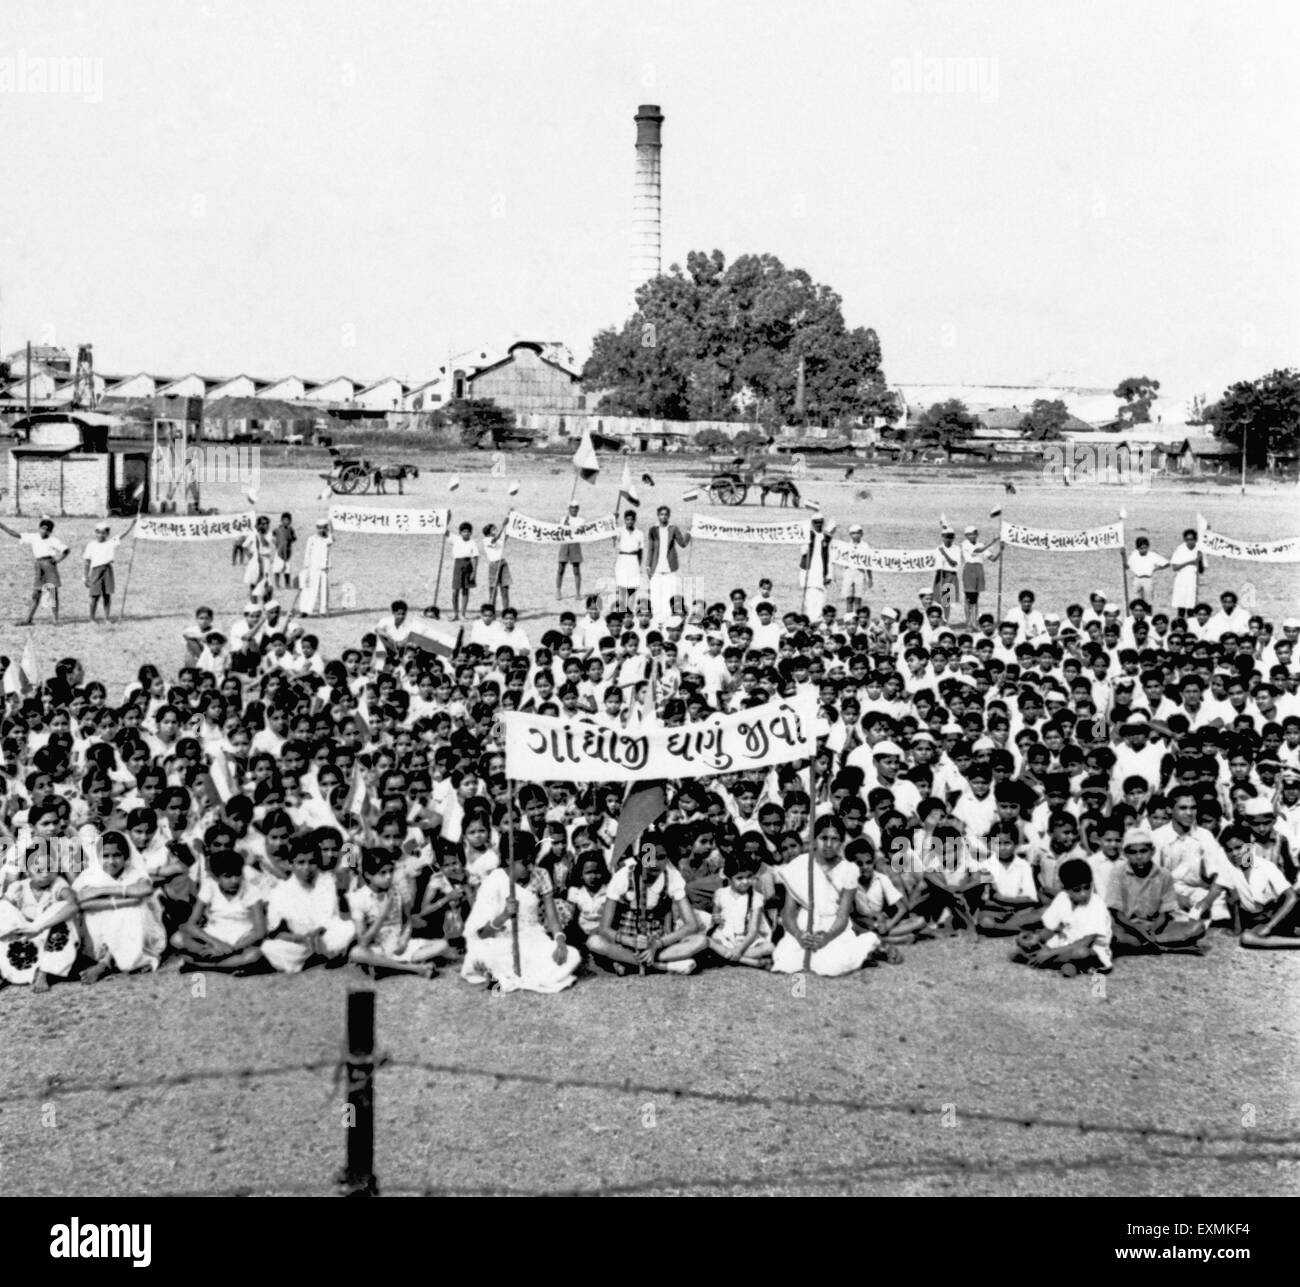 Gujarati people came to Pune in order to celebrate Mahatma Gandhi's birthday on 2nd Oct 1944 Stock Photo